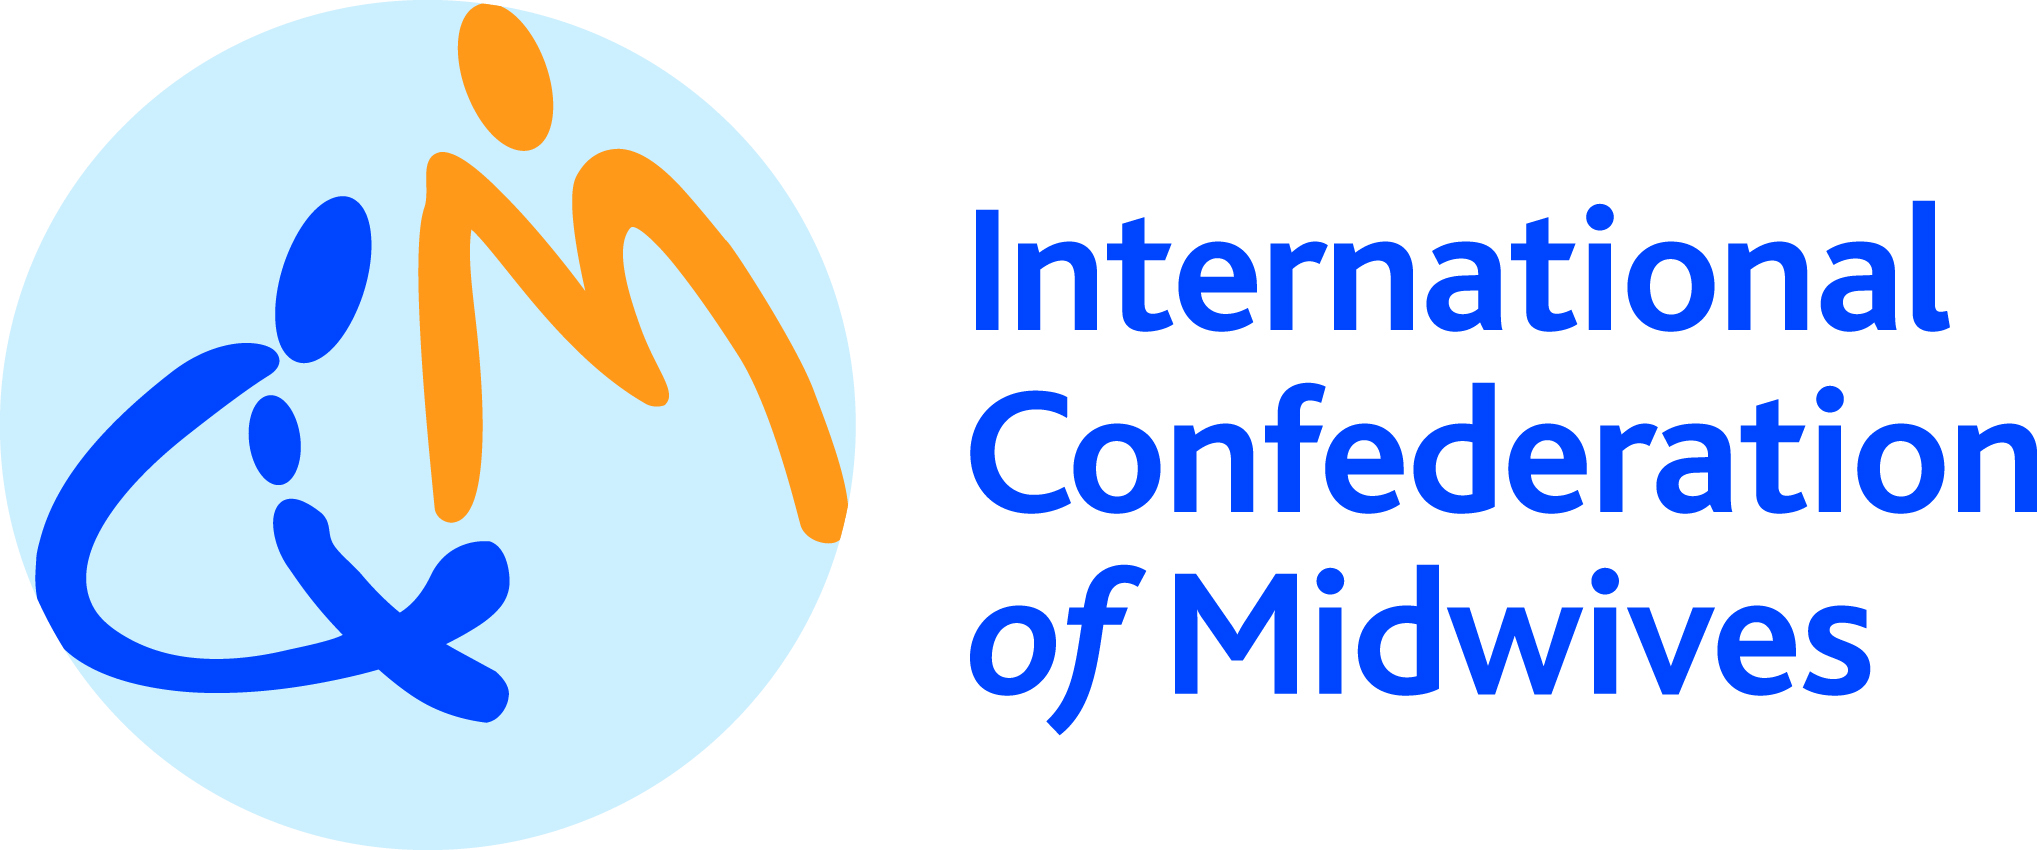 ICM Logo - ICM International Confederation of Midwives supports midwives